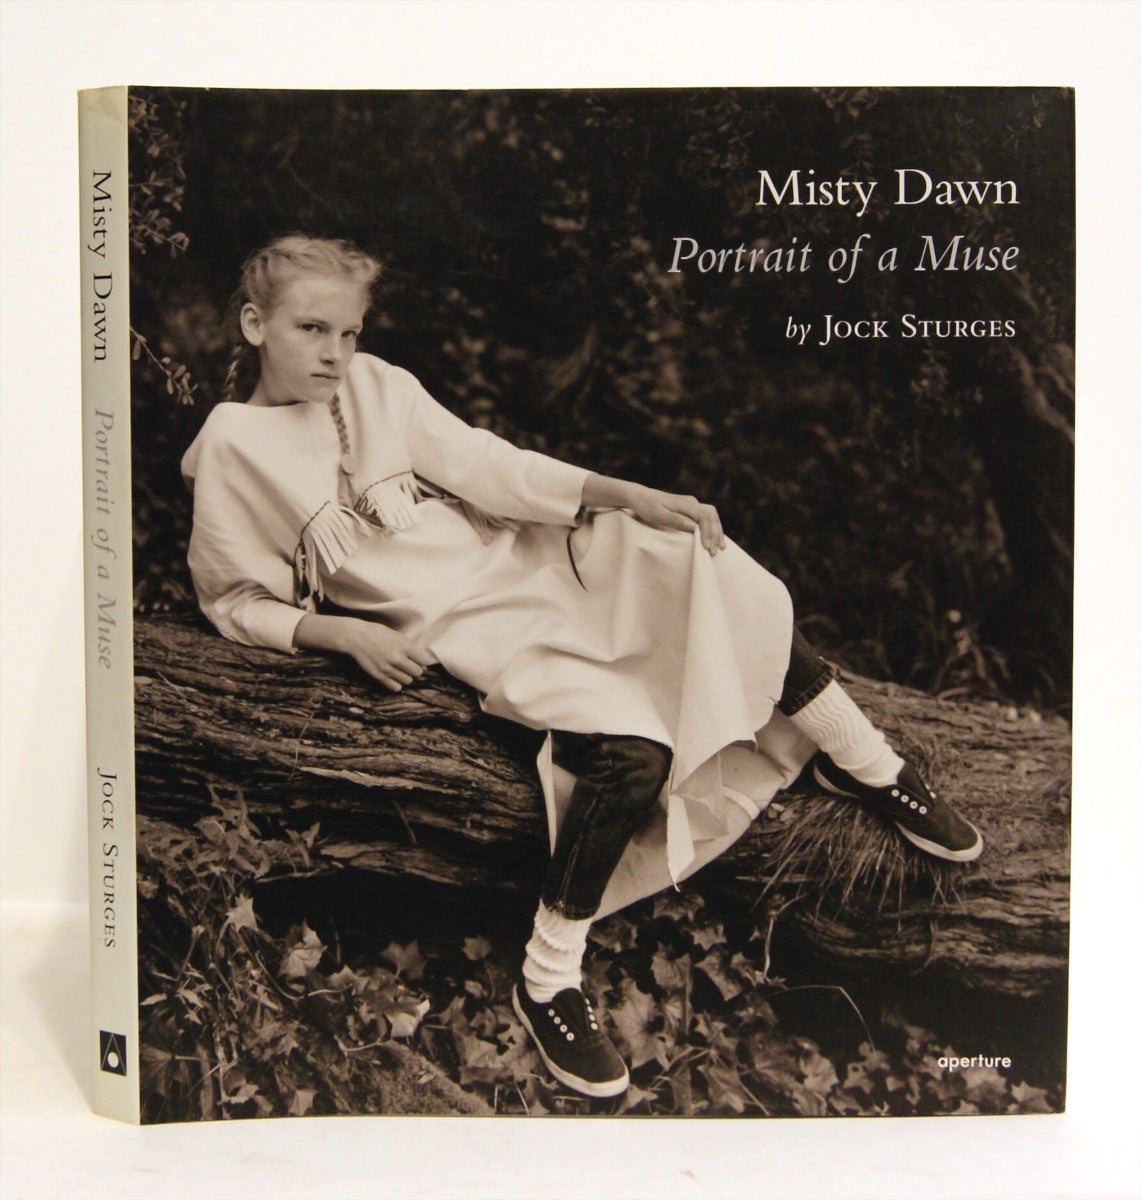 Misty Dawn: Portrait of a Muse by Jock Sturges on Arundel Books